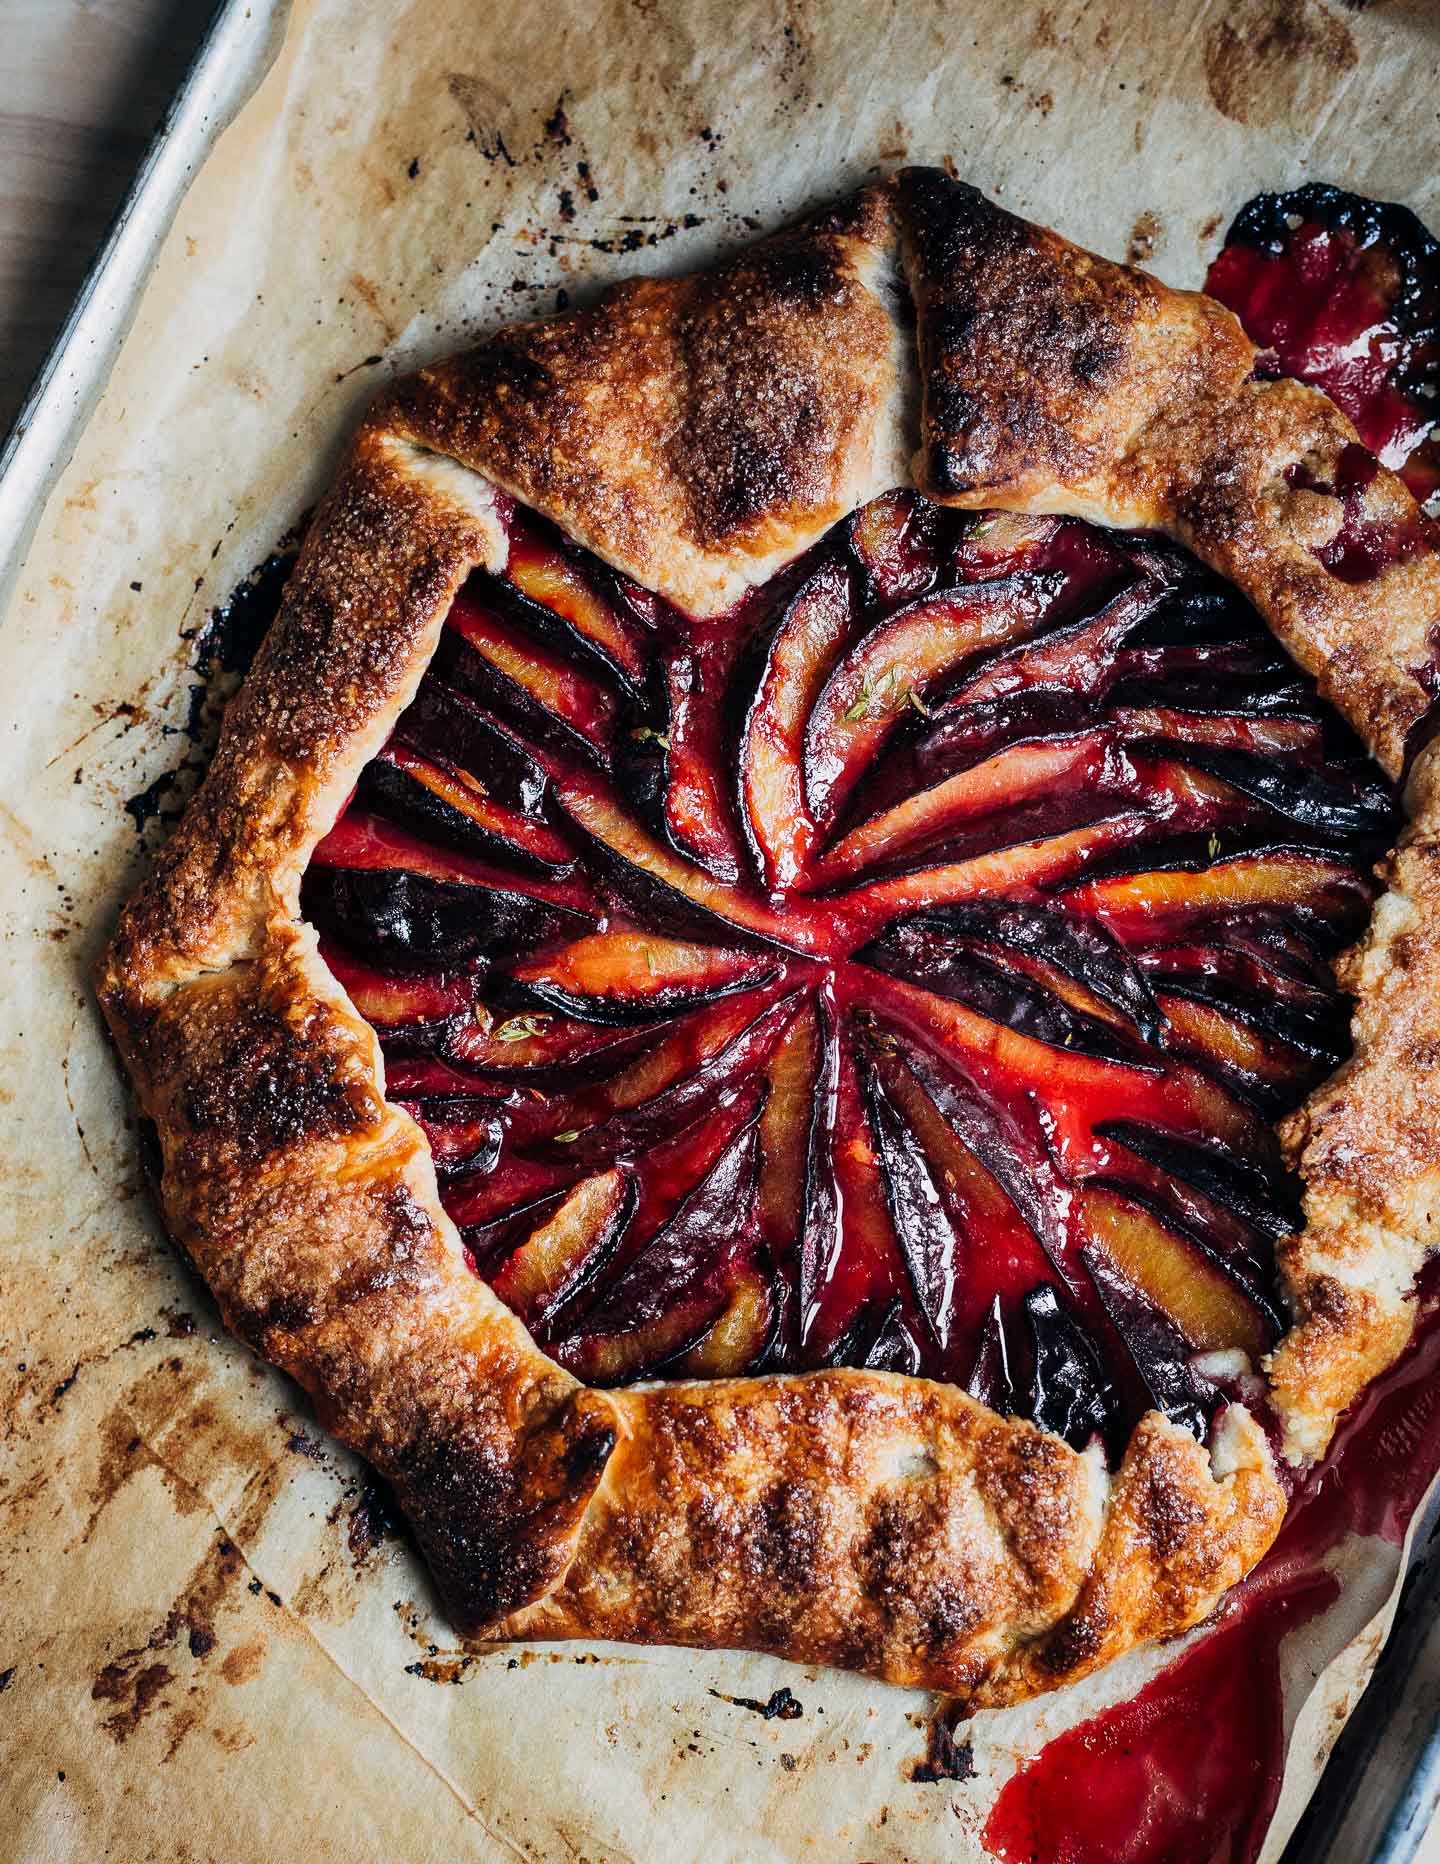 A beautifully rustic, of-the-moment Damson plum galette with fresh thyme, ground star anise, and a flaky all-butter crust.